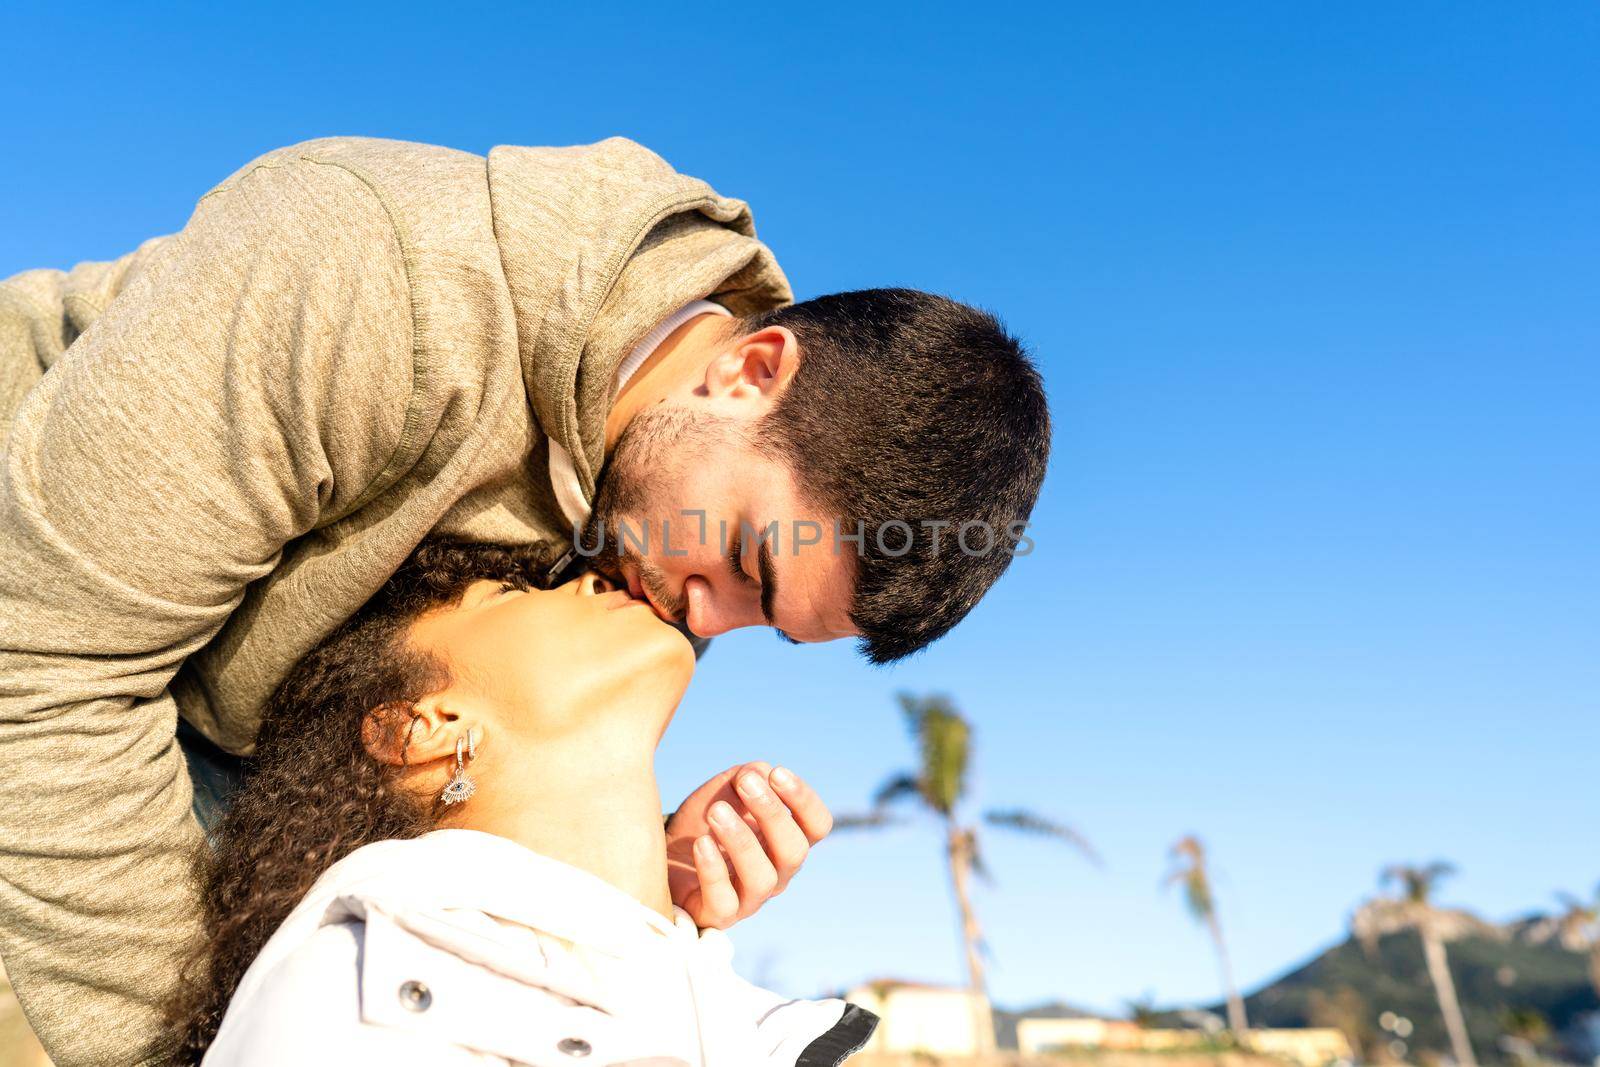 Handsome guy kissing her african-american black girlfriend approaching her mouth from above. Mixed race young couple in love romance vacation scene in sea or ocean resort with copy space in blue sky